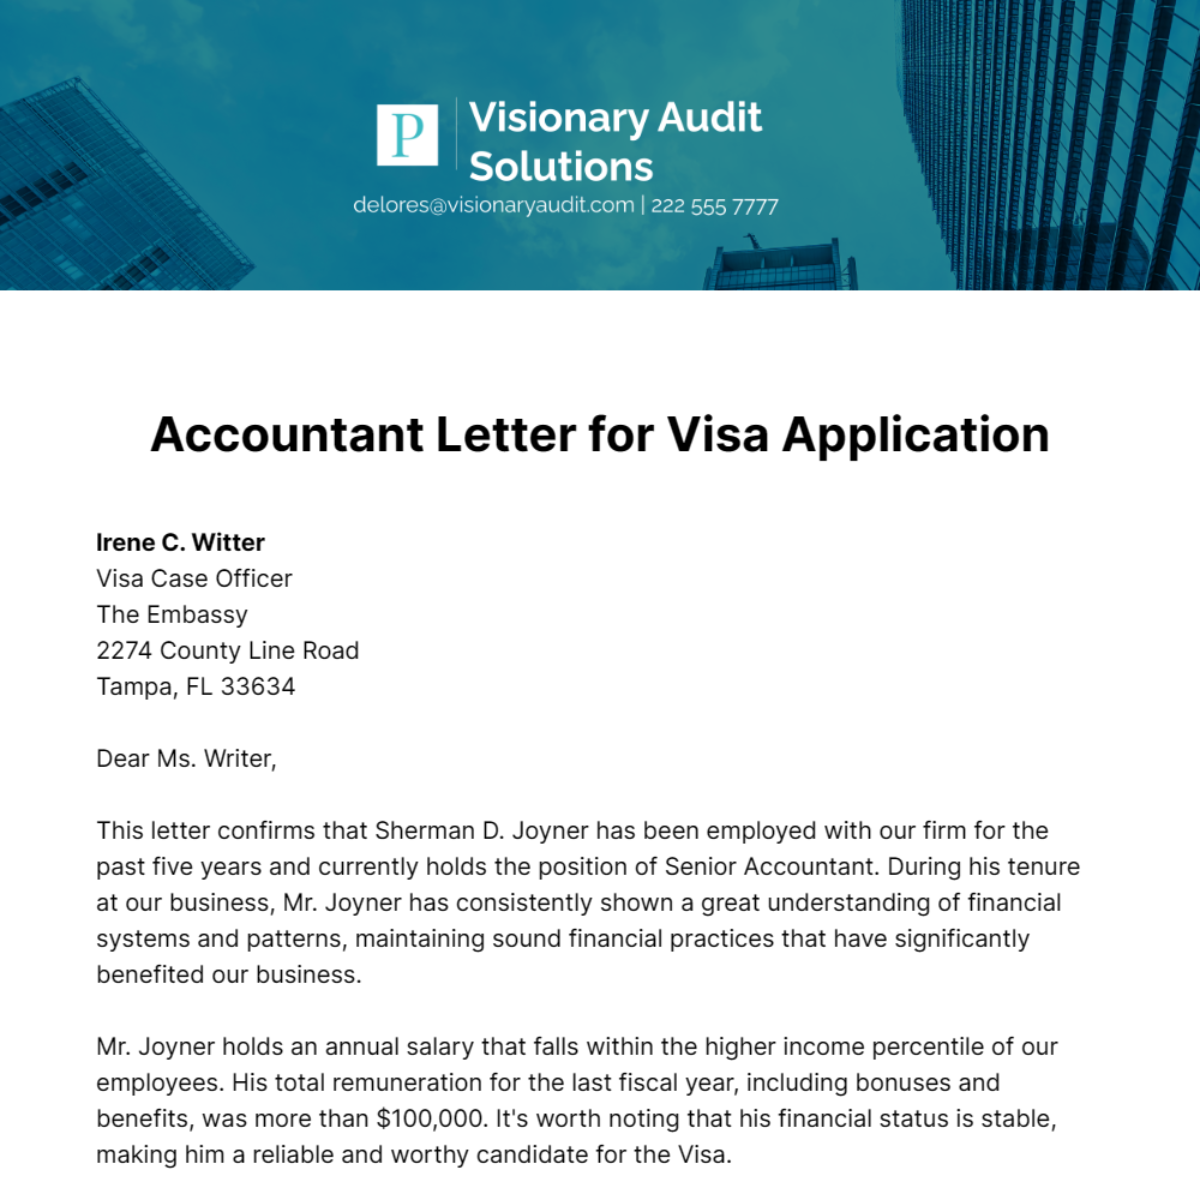 Accountant Letter for Visa Application Template